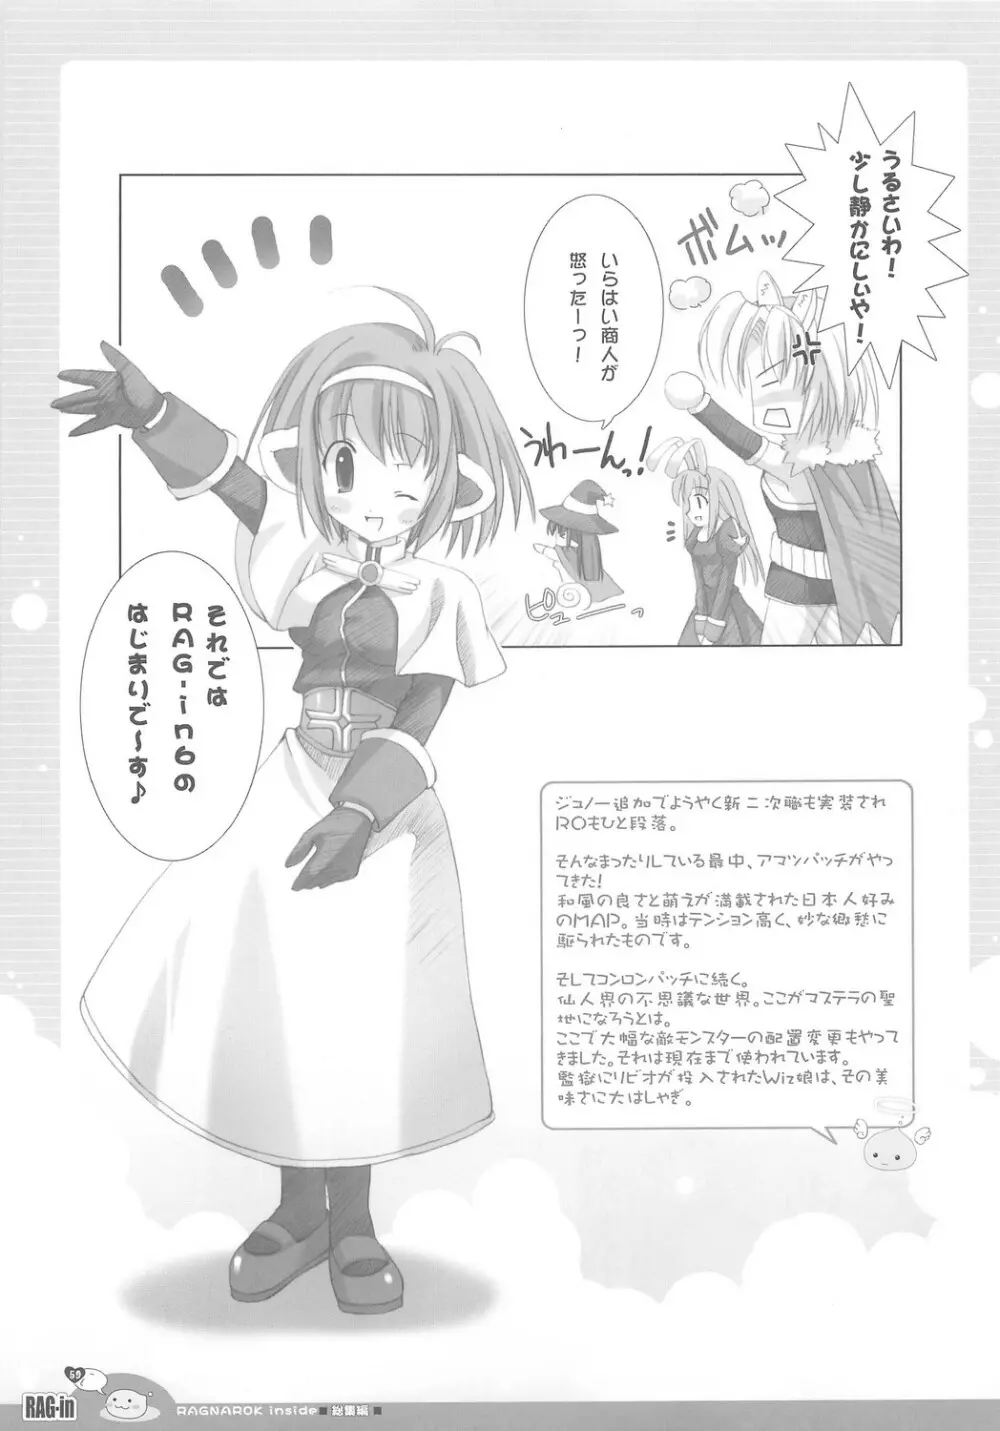 RAG-in 1～10 総集編 Page.63